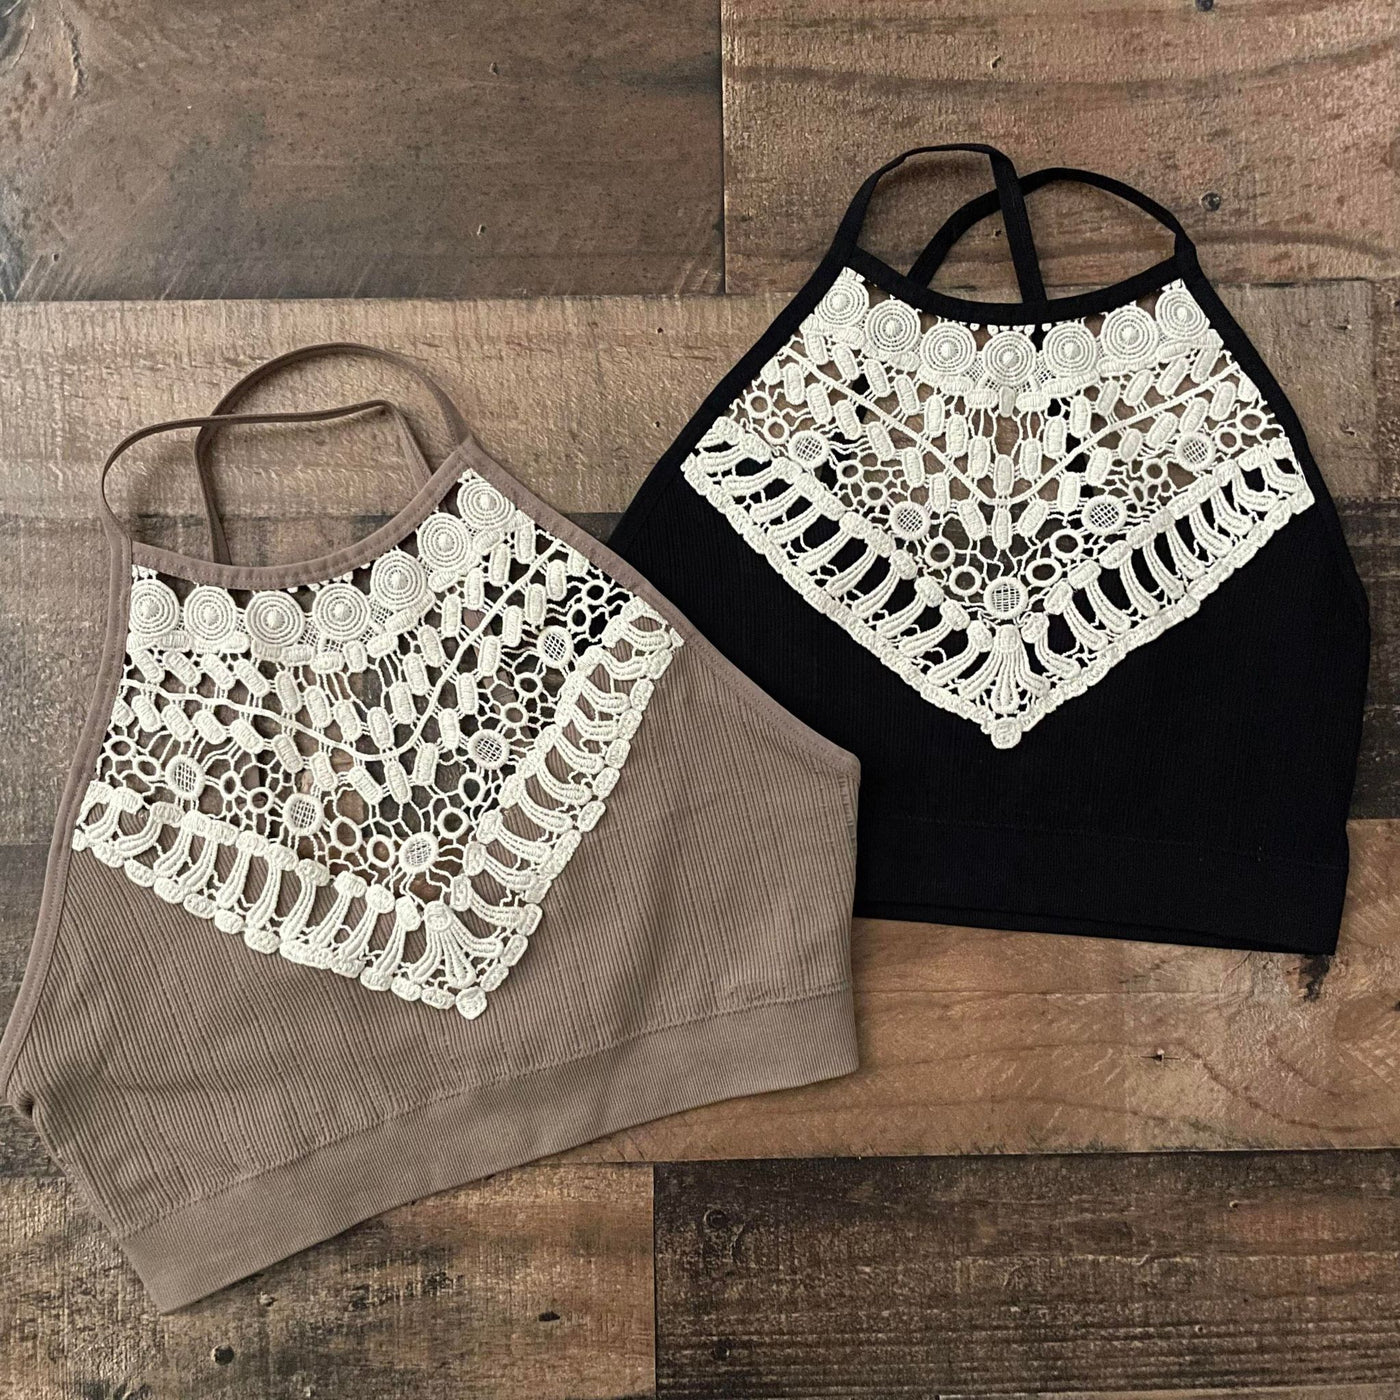 Crochet Lace High Neck Bralette in Tan and Black